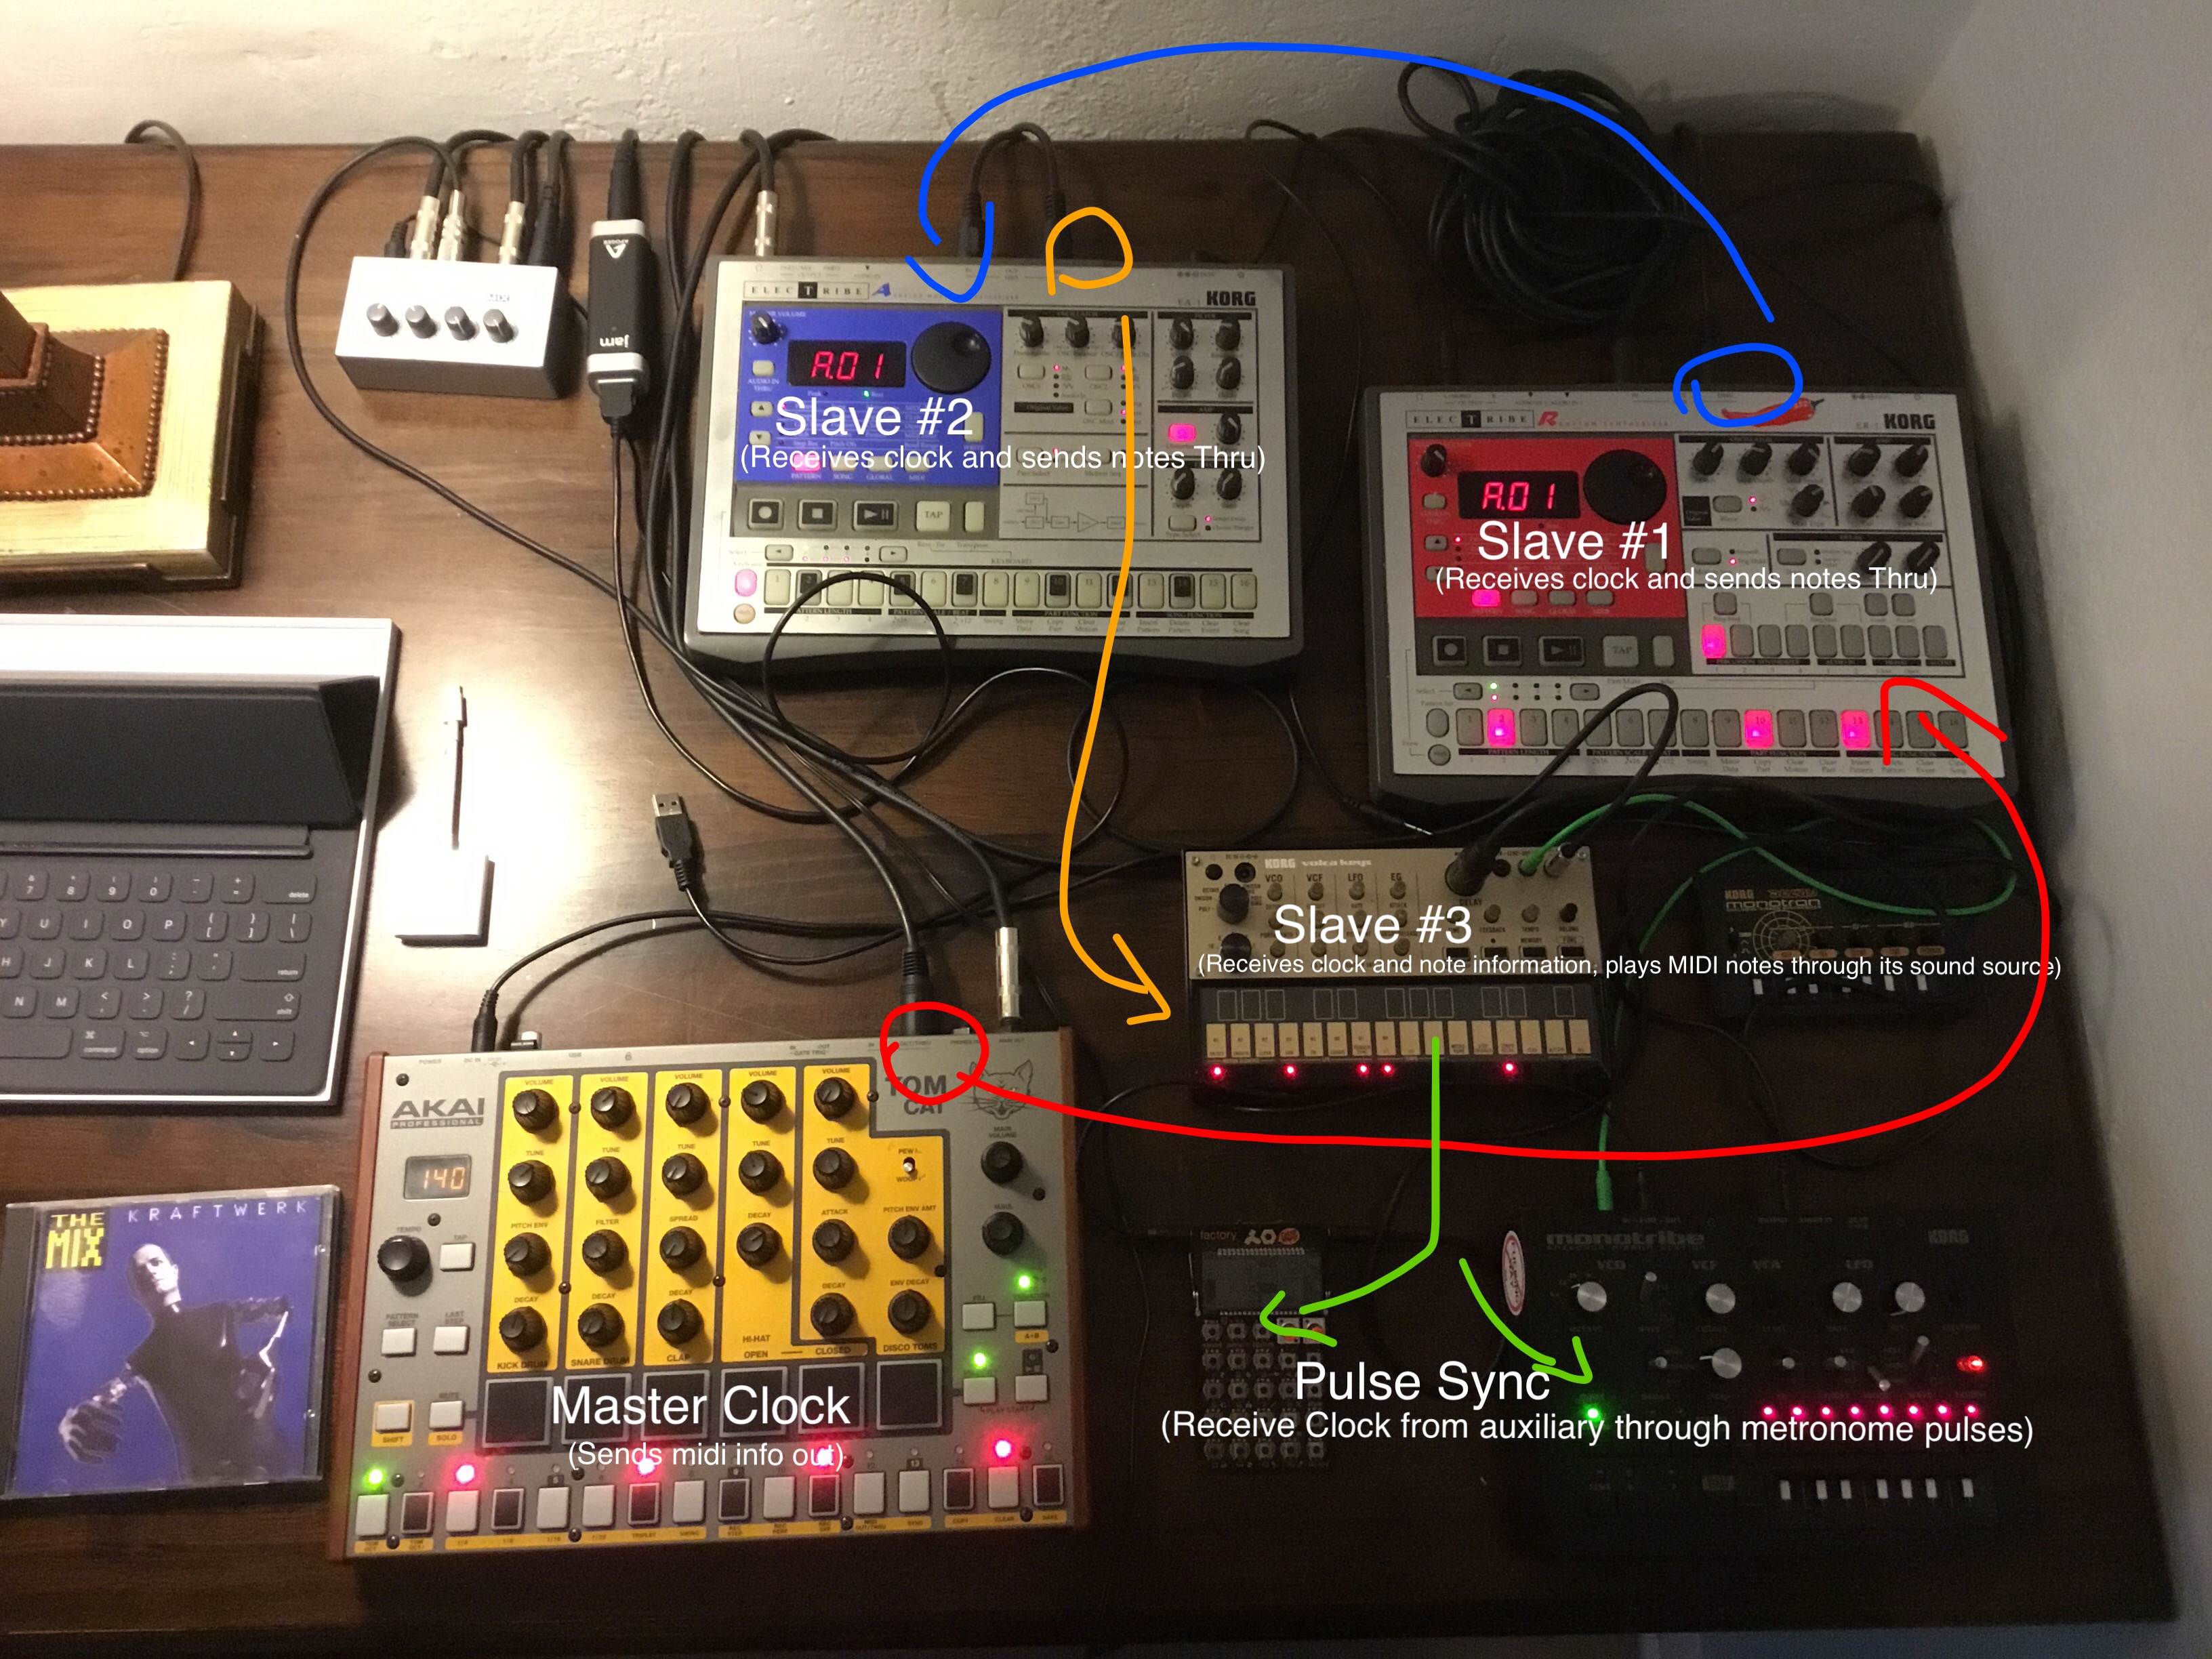 Multiple electronic instruments connected through MIDI connections. Set up explained in text below the image.